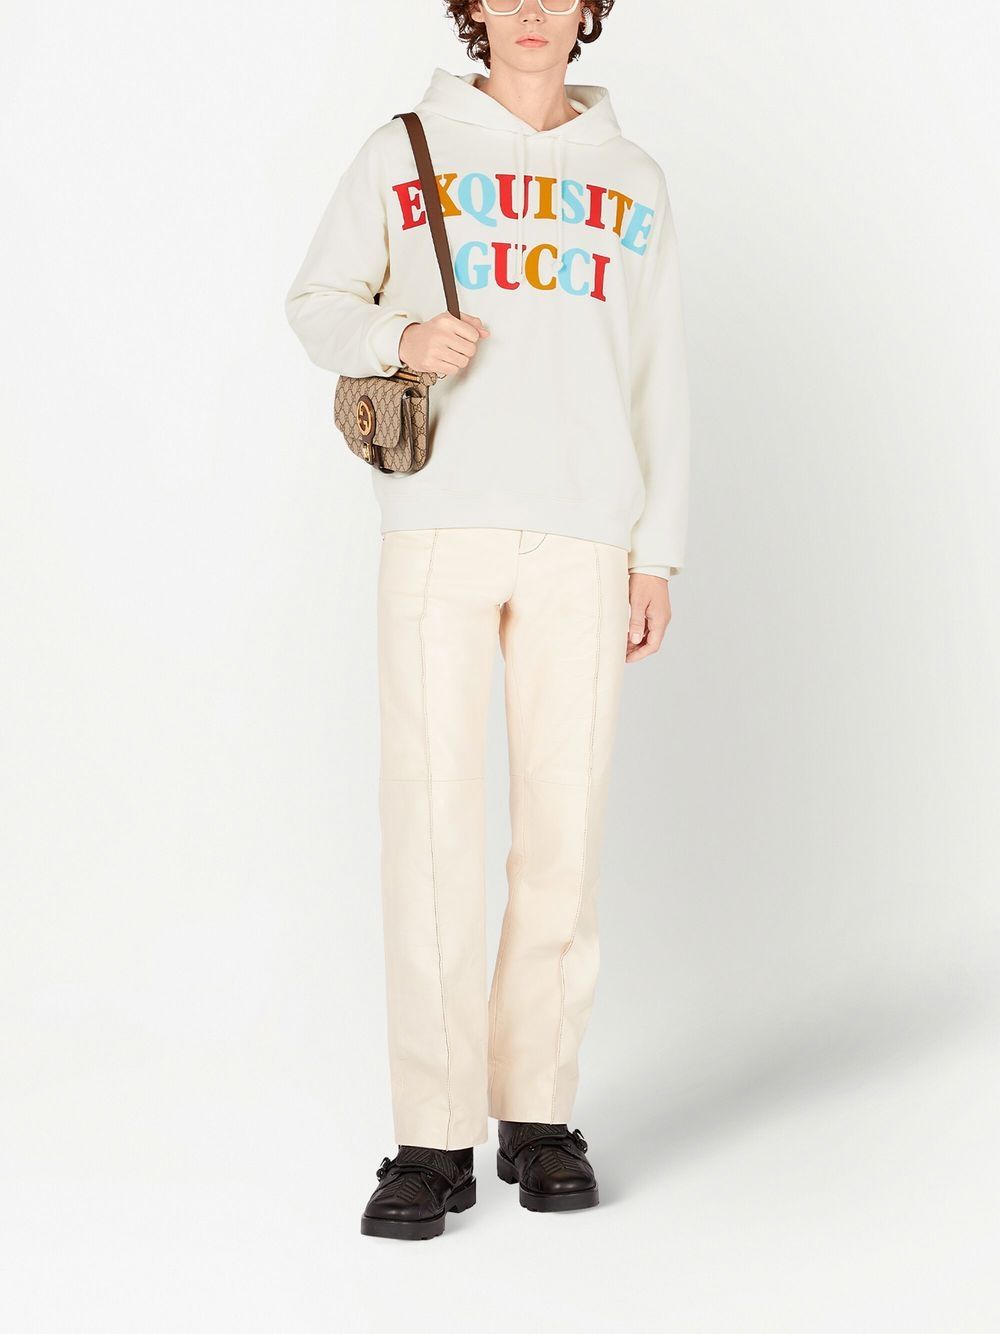 Shop Gucci Men's White Cotton Hoodie With Contrasting Color Print And Back Graphic In Cream